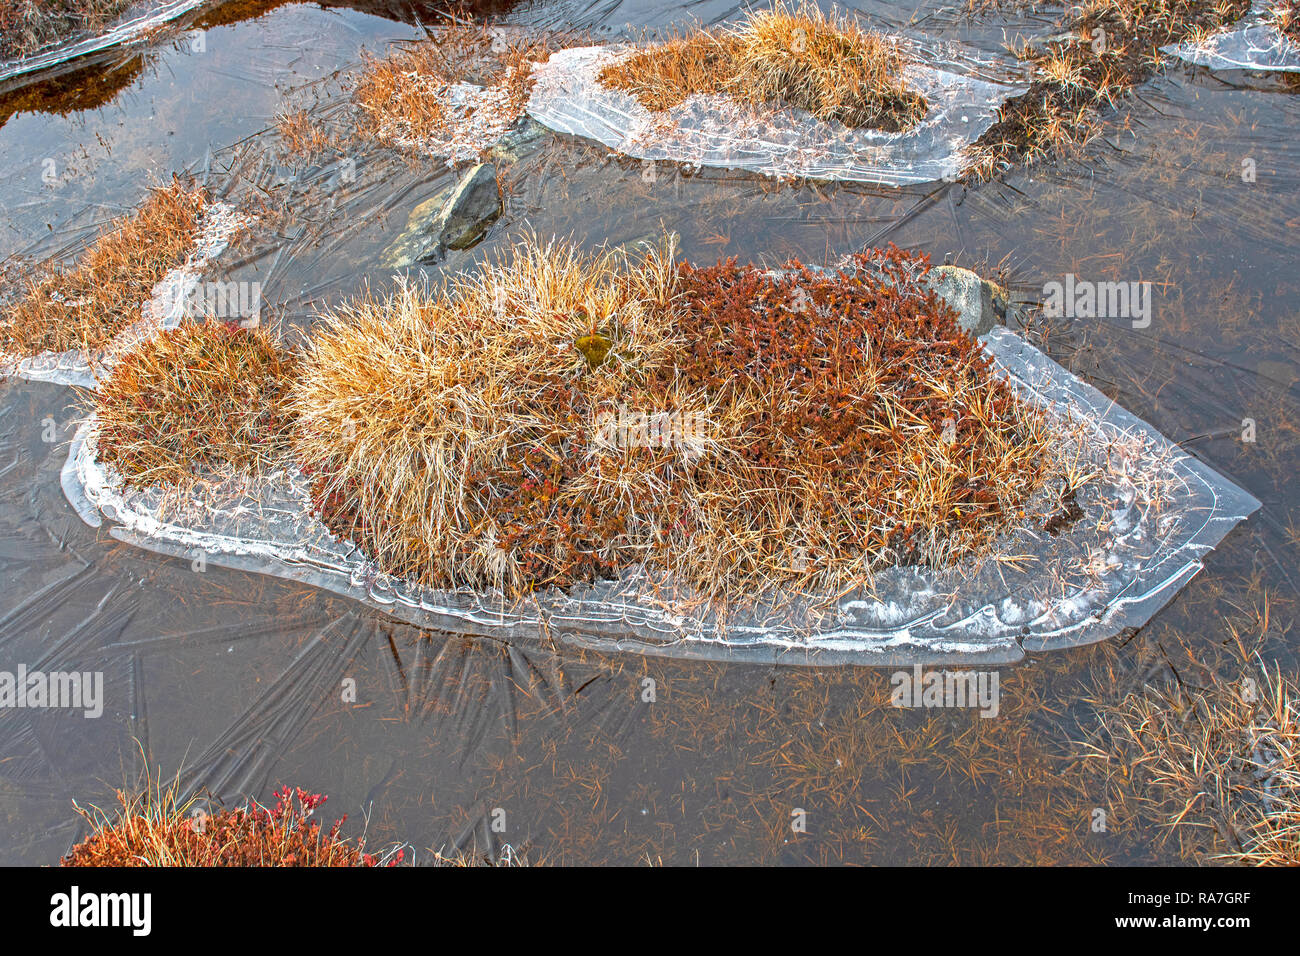 Frozen Water and Tundra Vegetation in the Fall along the Icefjord of Ilulissat, Greenland Stock Photo